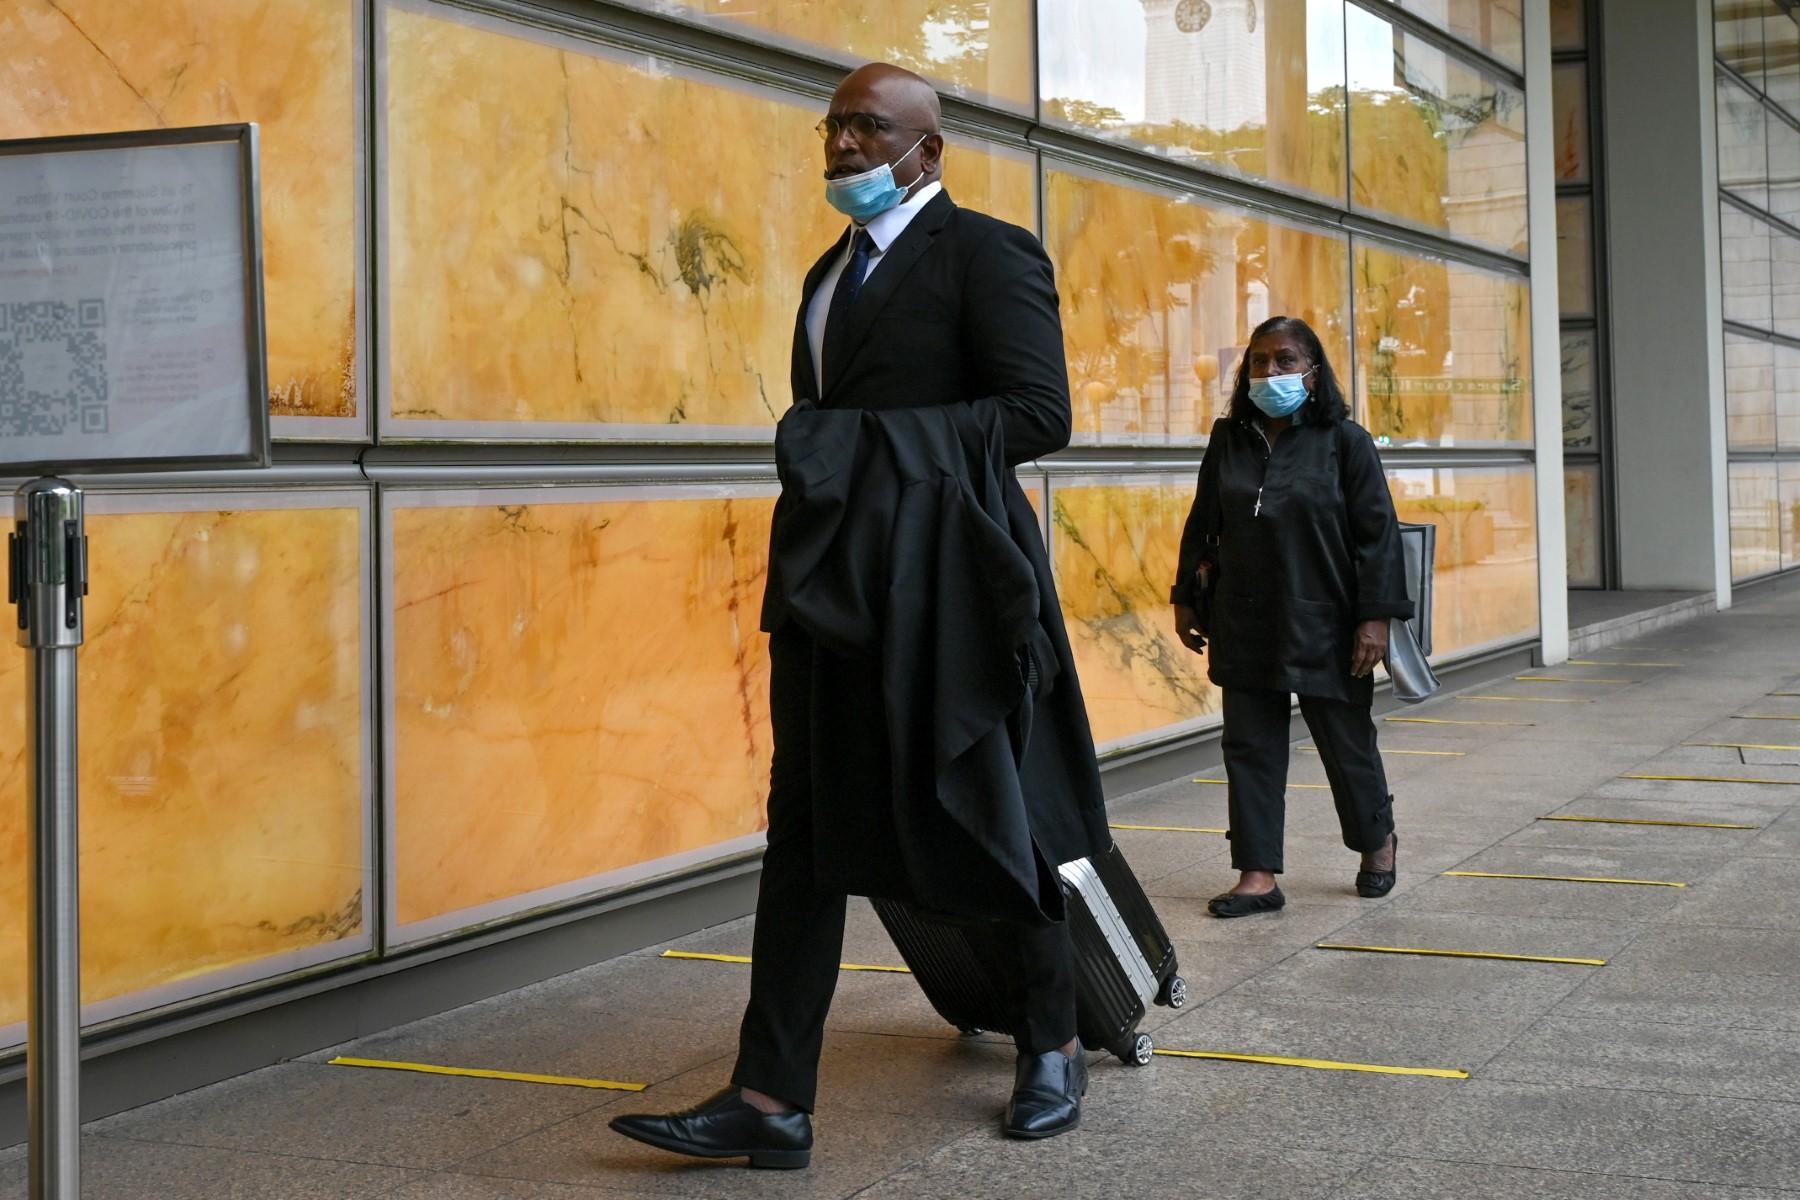 Singapore lawyers M Ravi (front) and Violet Netto (back) arrive at the Supreme Court in Singapore on March 1, for the hearing of Nagaenthran K Dharmalingam's appeal against his death sentence. Photo: AFP